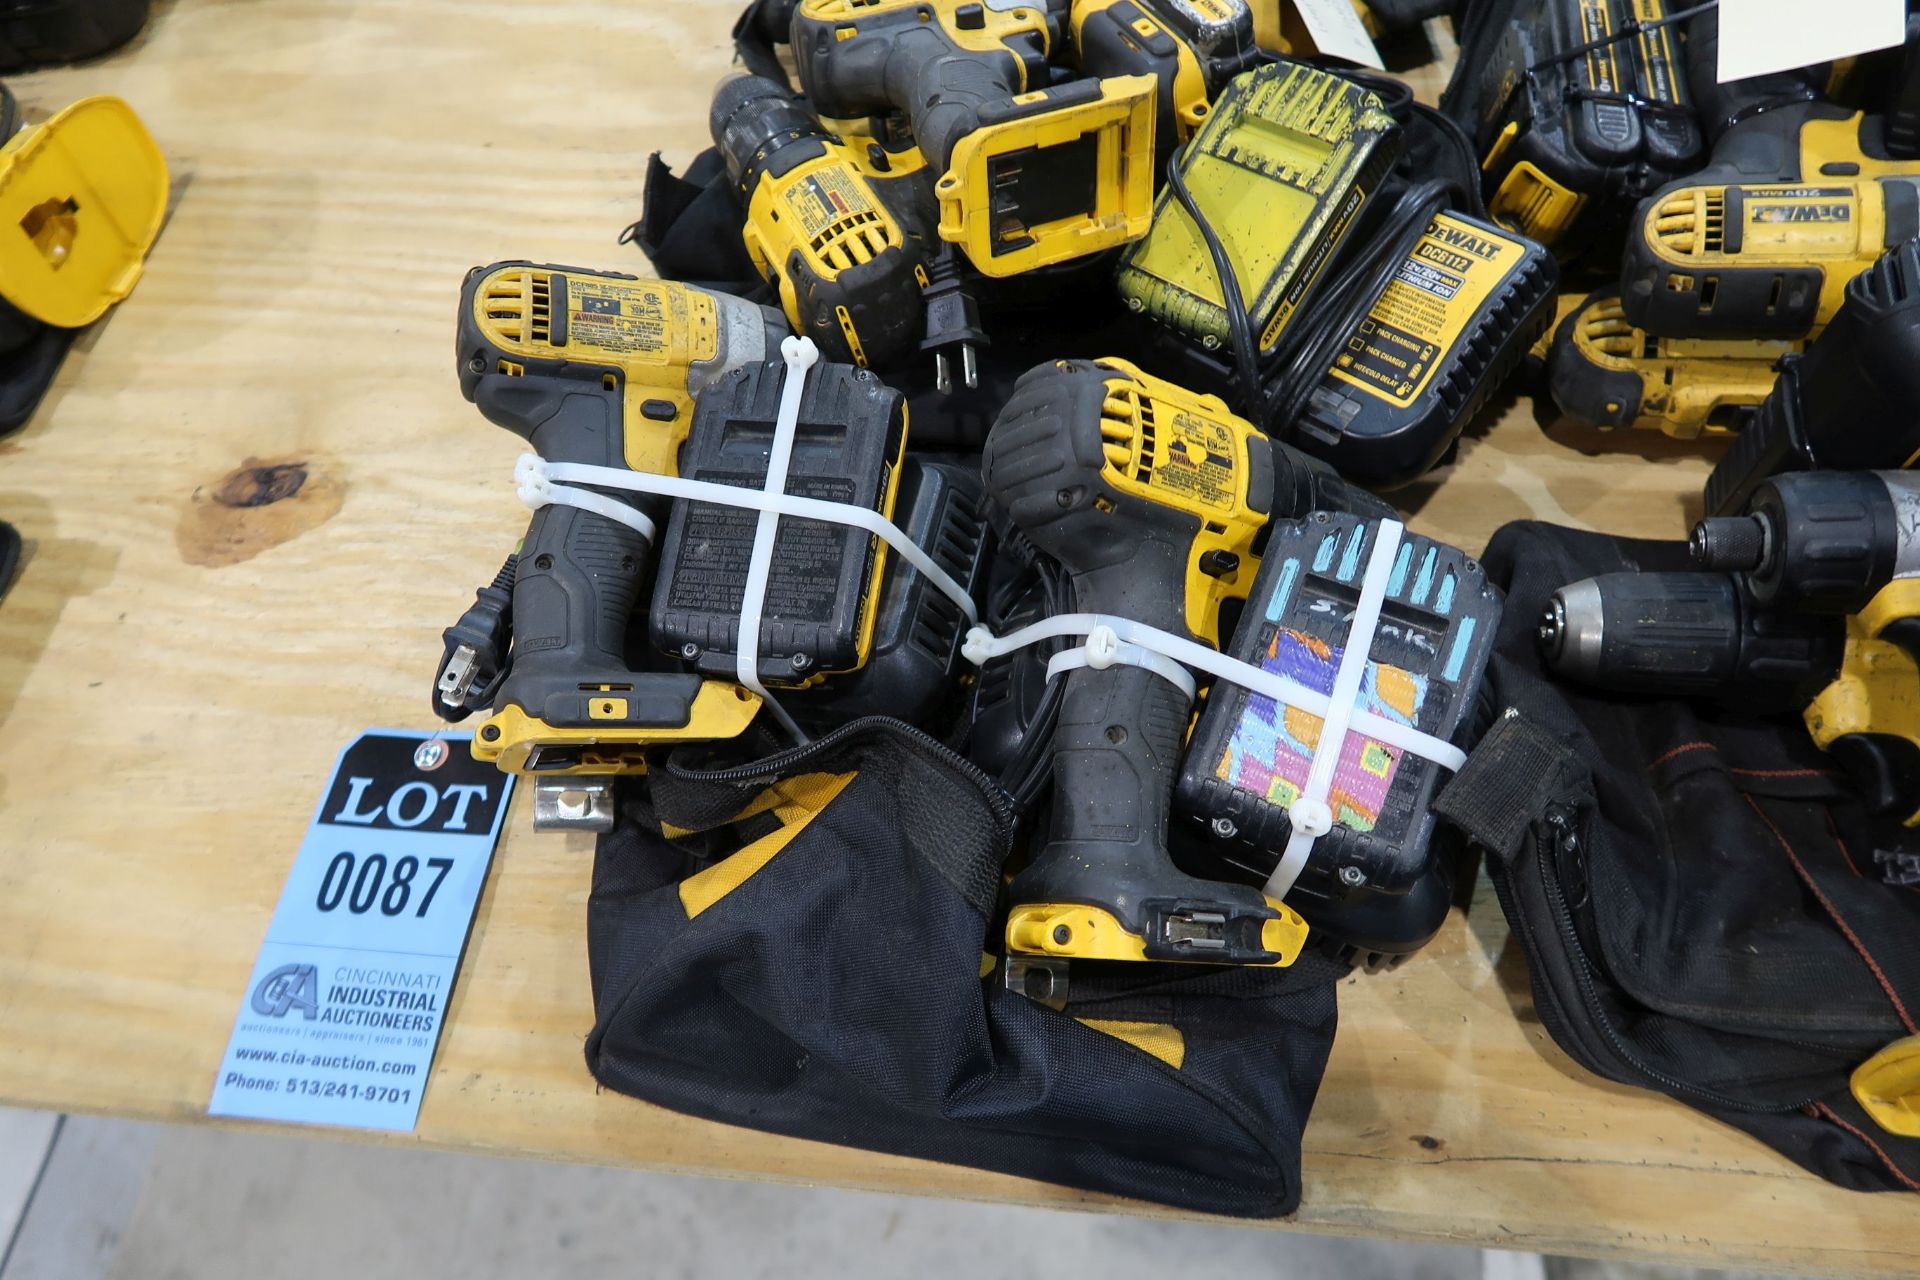 MISCELLANEOUS DEWALT CORDLESS SCREWDRIVERS AND DRILL DRIVERS WITH CHARGERS - Image 2 of 2